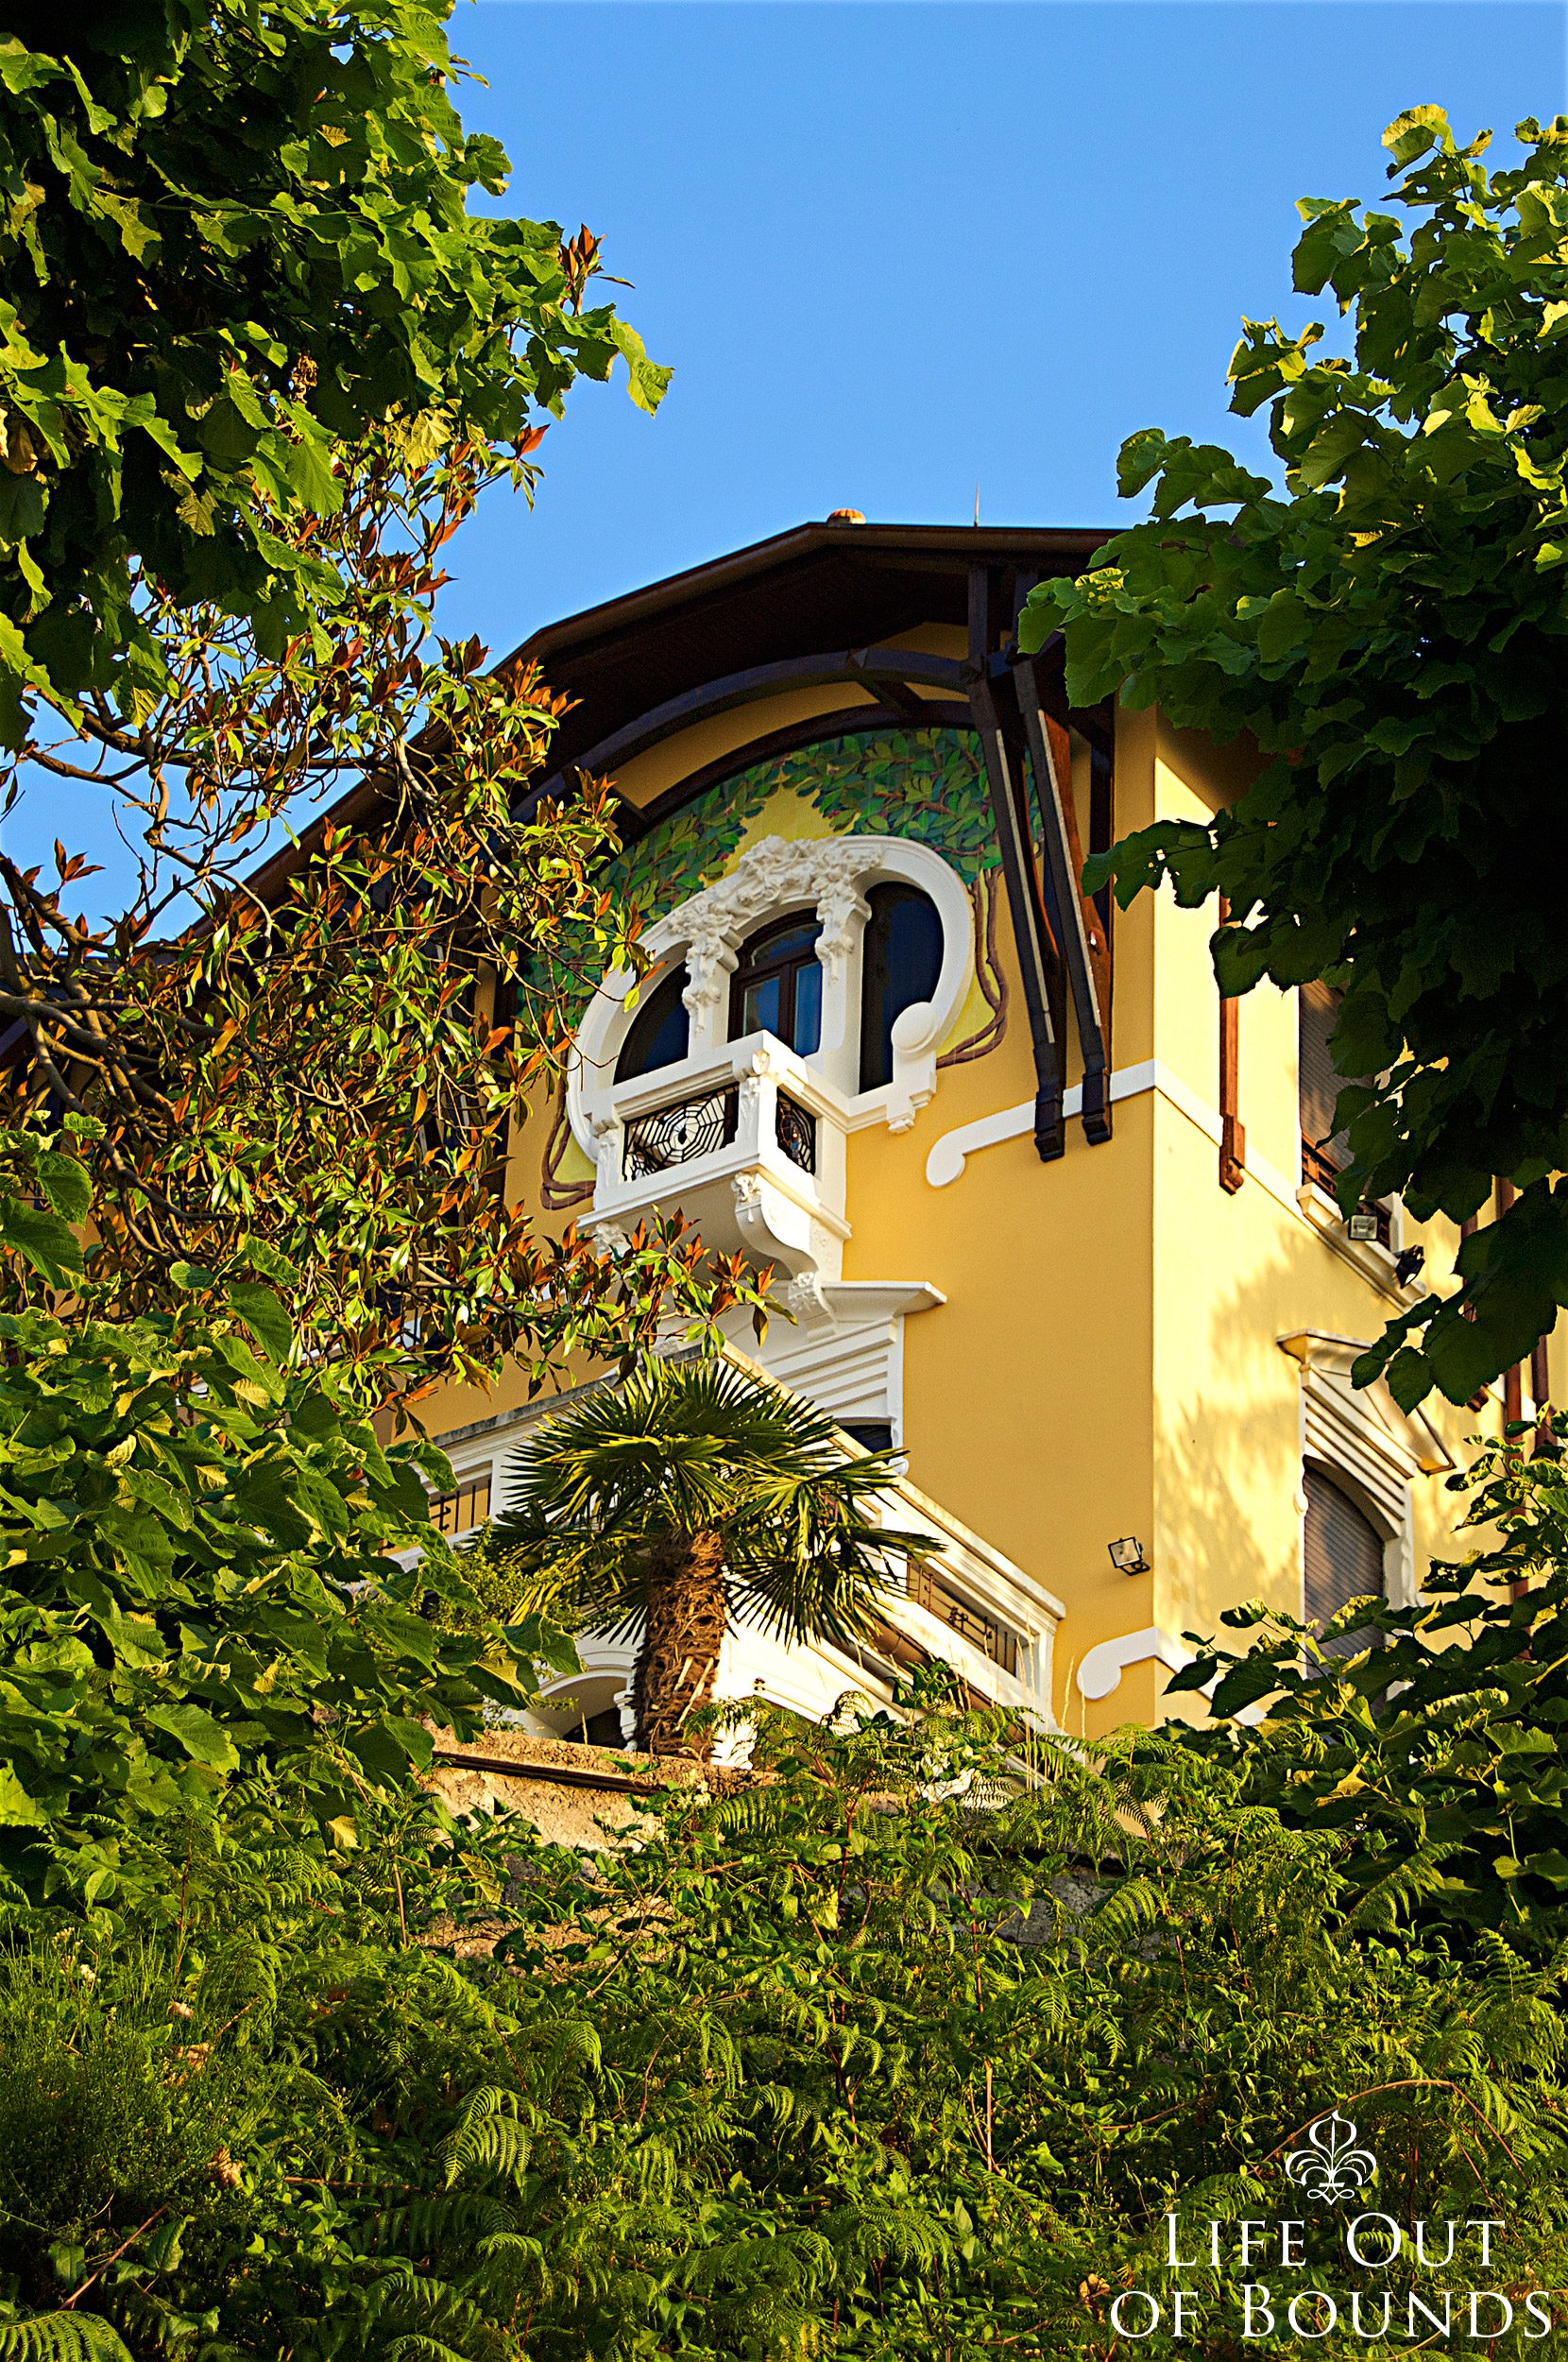 Beautiful-Liberty-style-house-in-Sacro-Monte-di-Varese-Italy